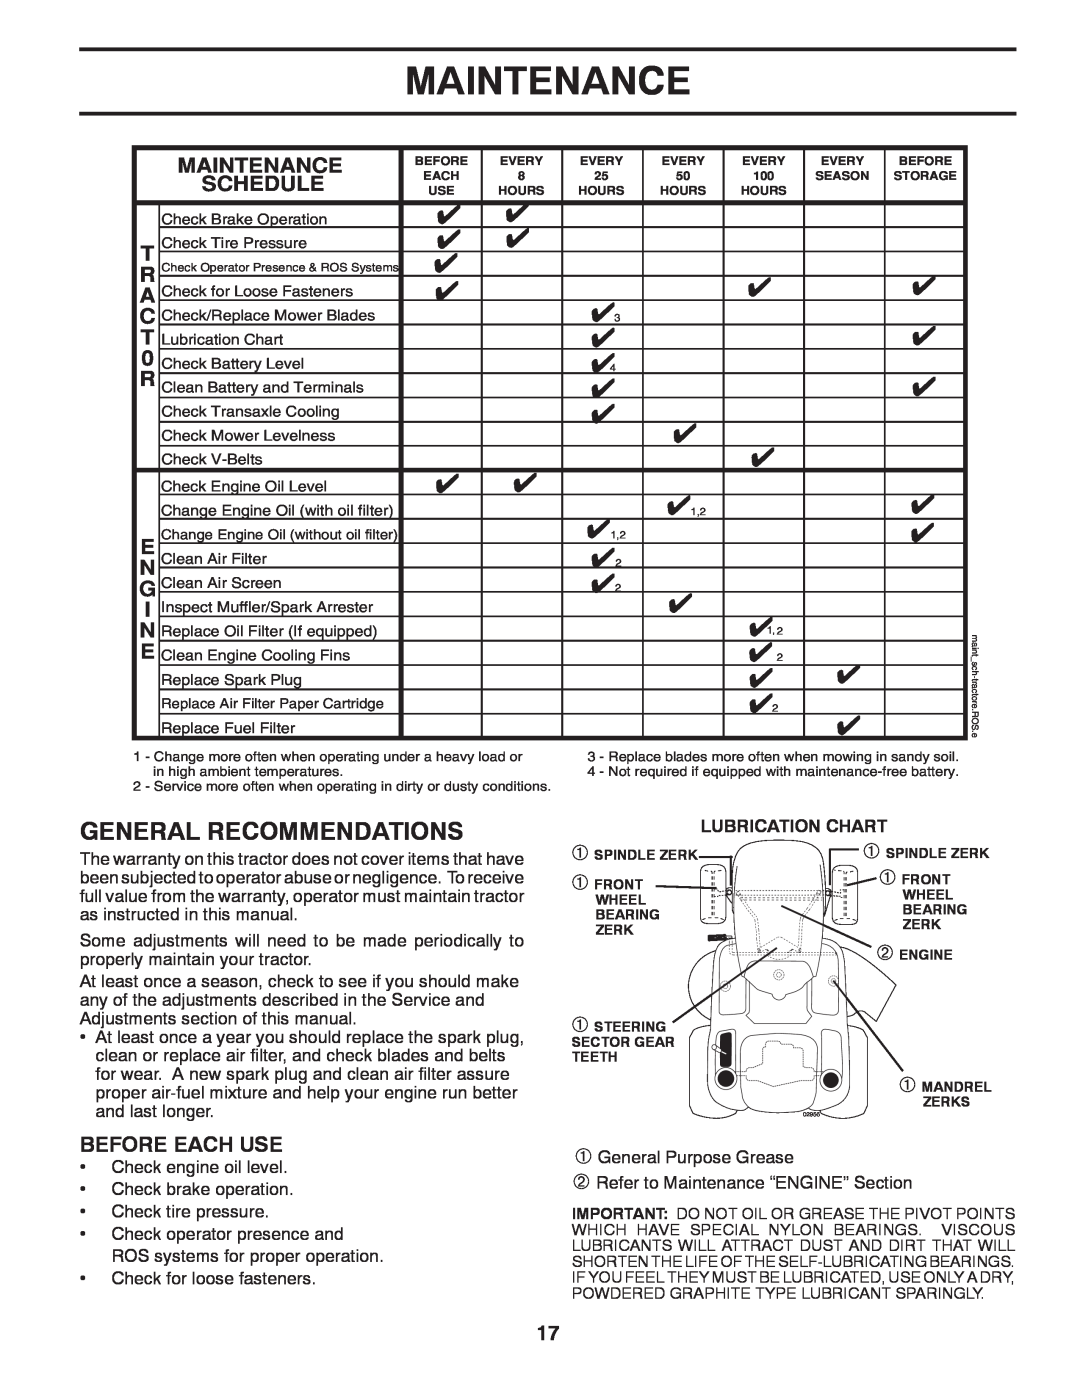 Poulan 423349 manual Maintenance, General Recommendations, Schedule, Before Each Use 